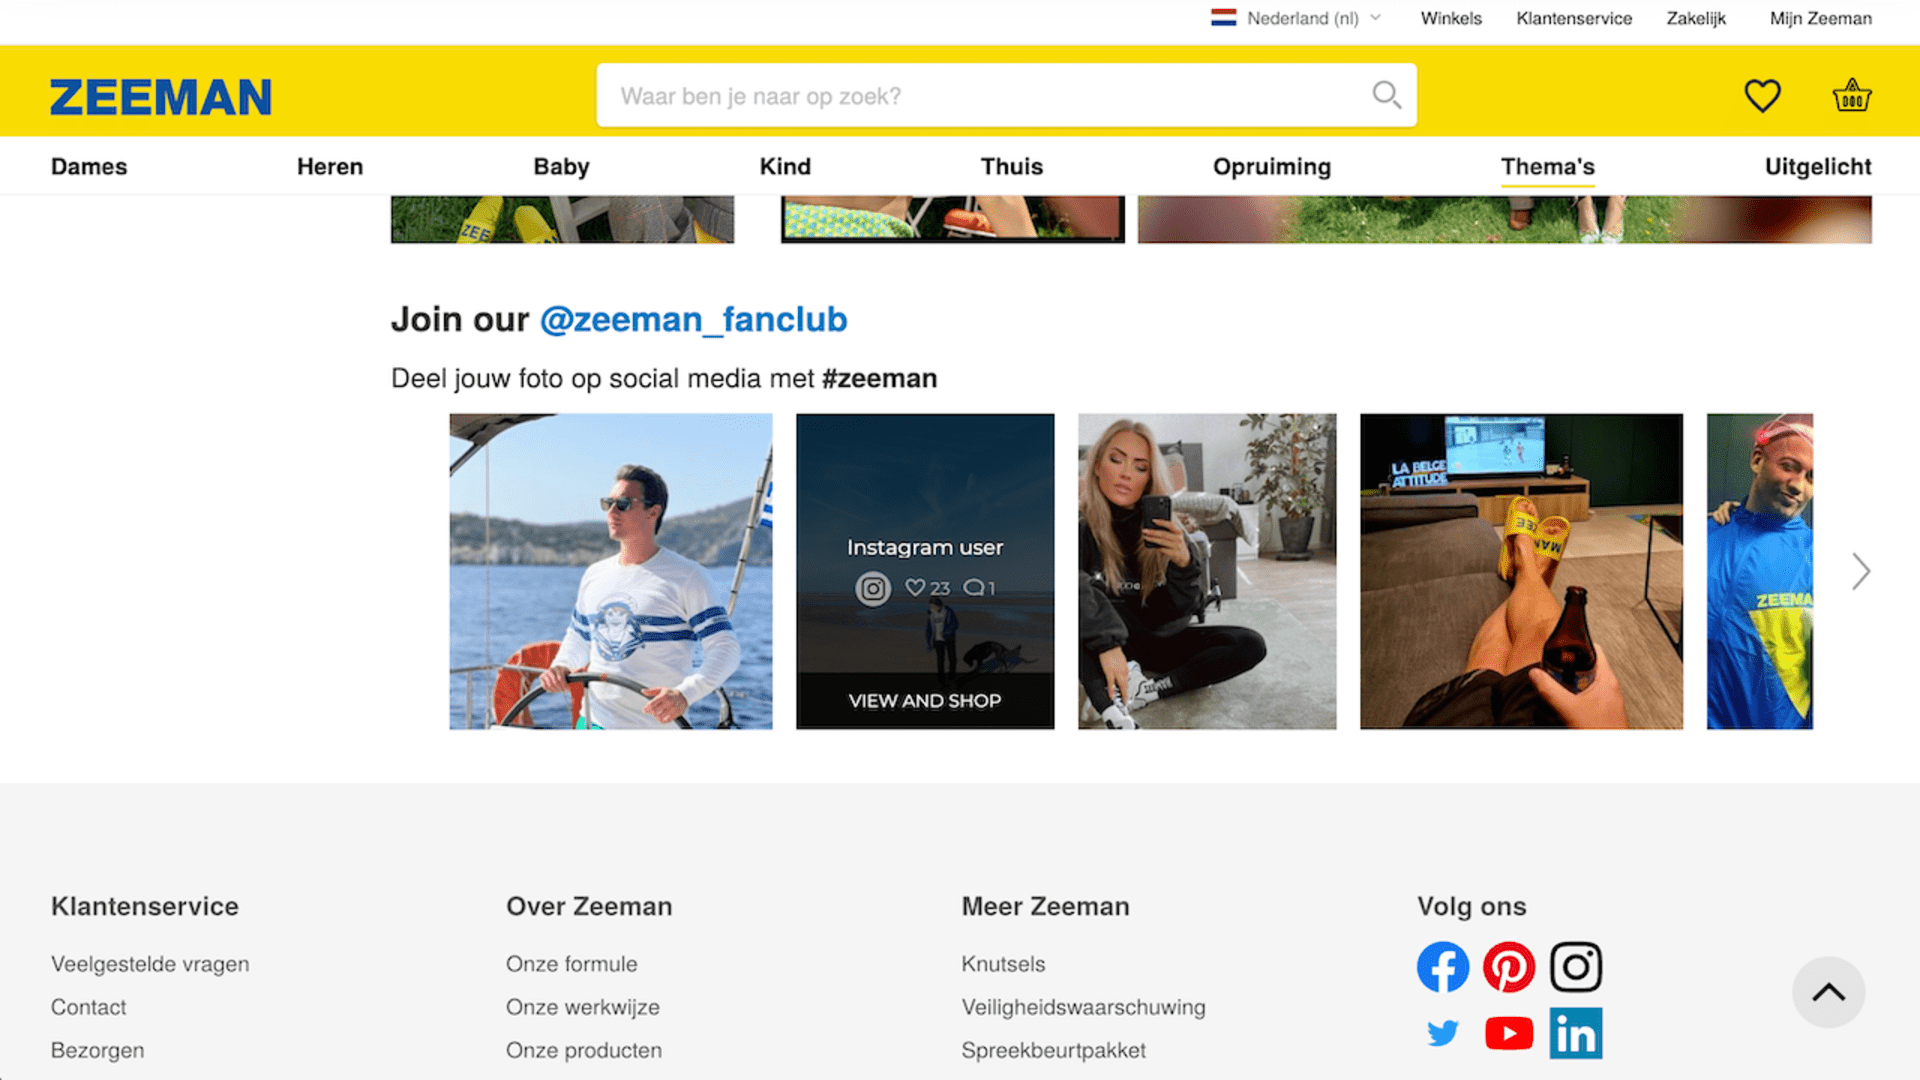 Zeeman teams up with Flowbox to engage with their customers 